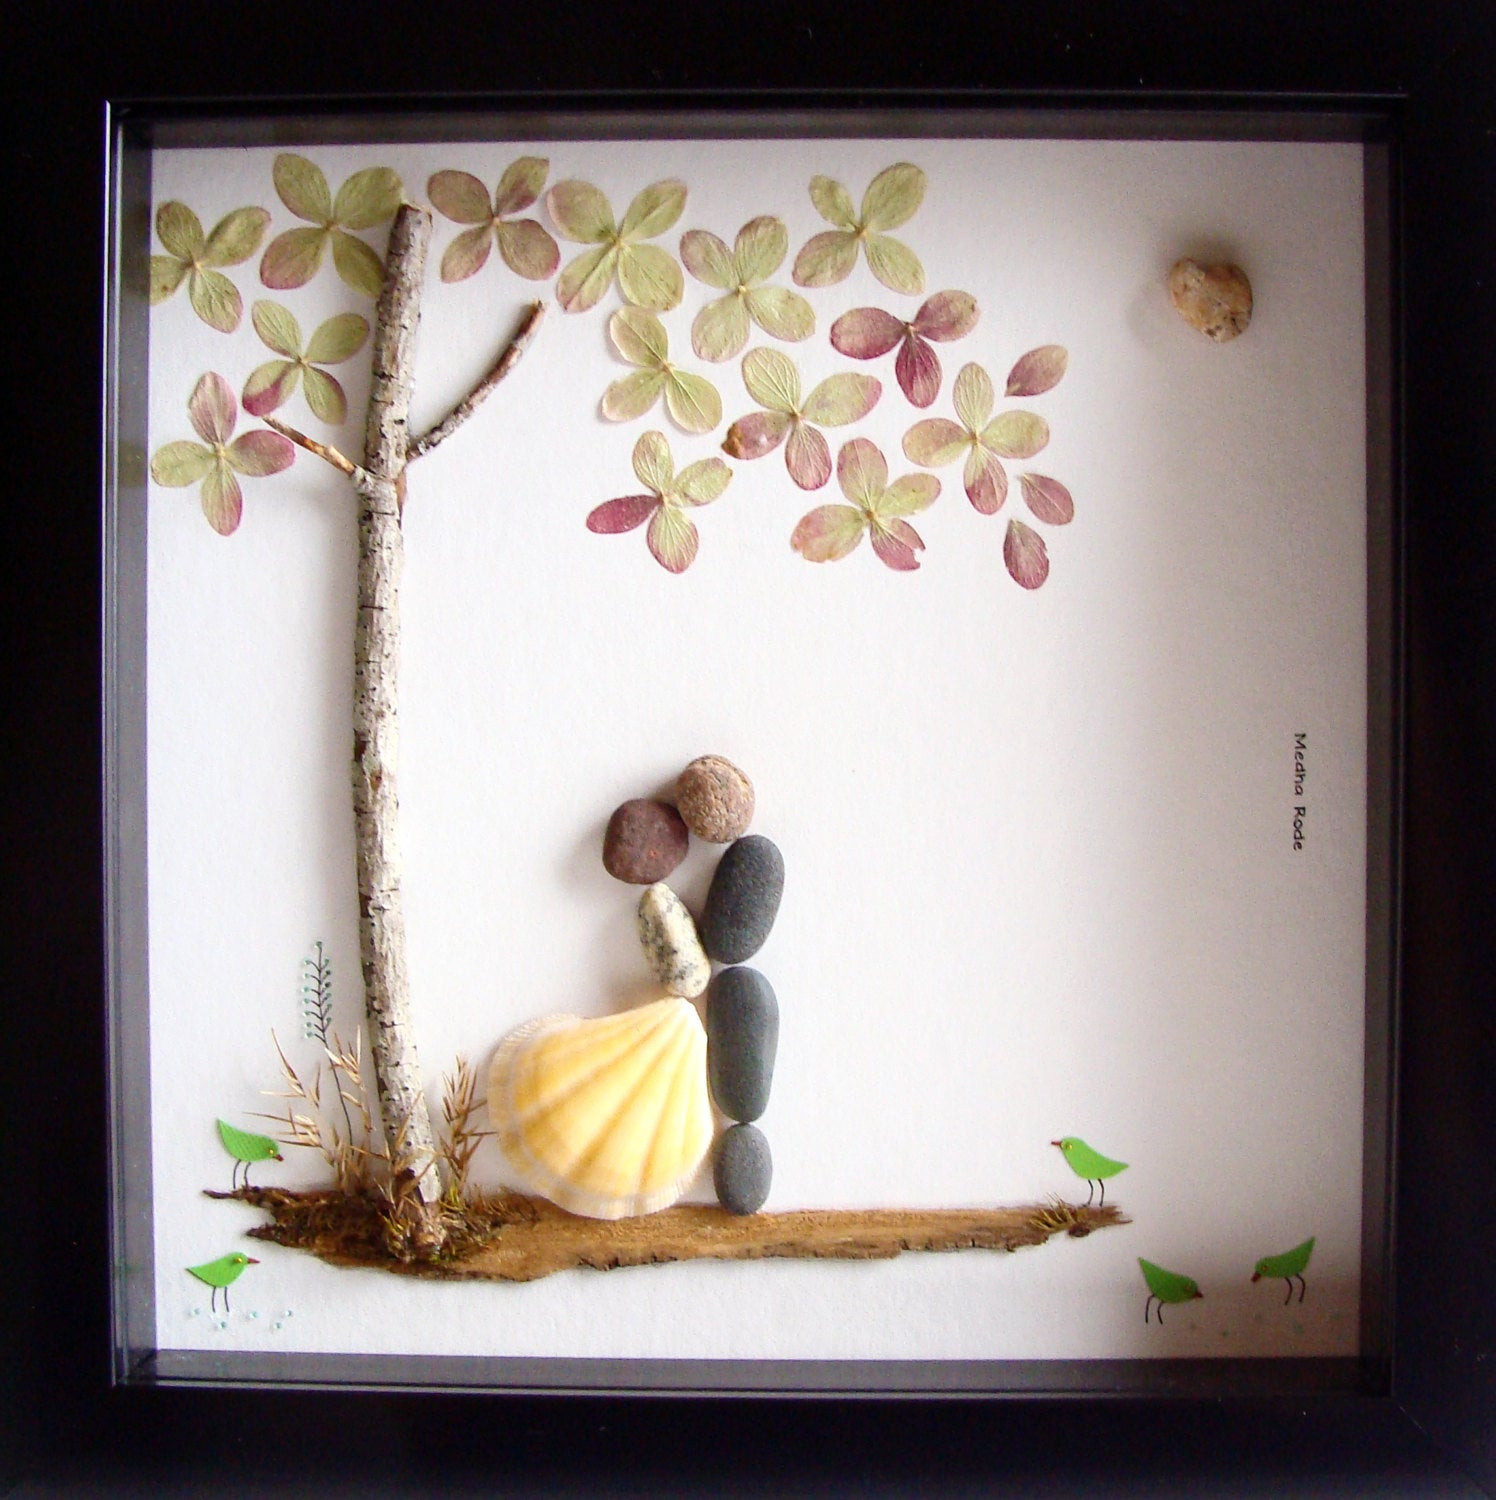 Wedding Gift Ideas For Wealthy Couple
 Unique Wedding Gift For Couple Wedding Pebble Art Unique